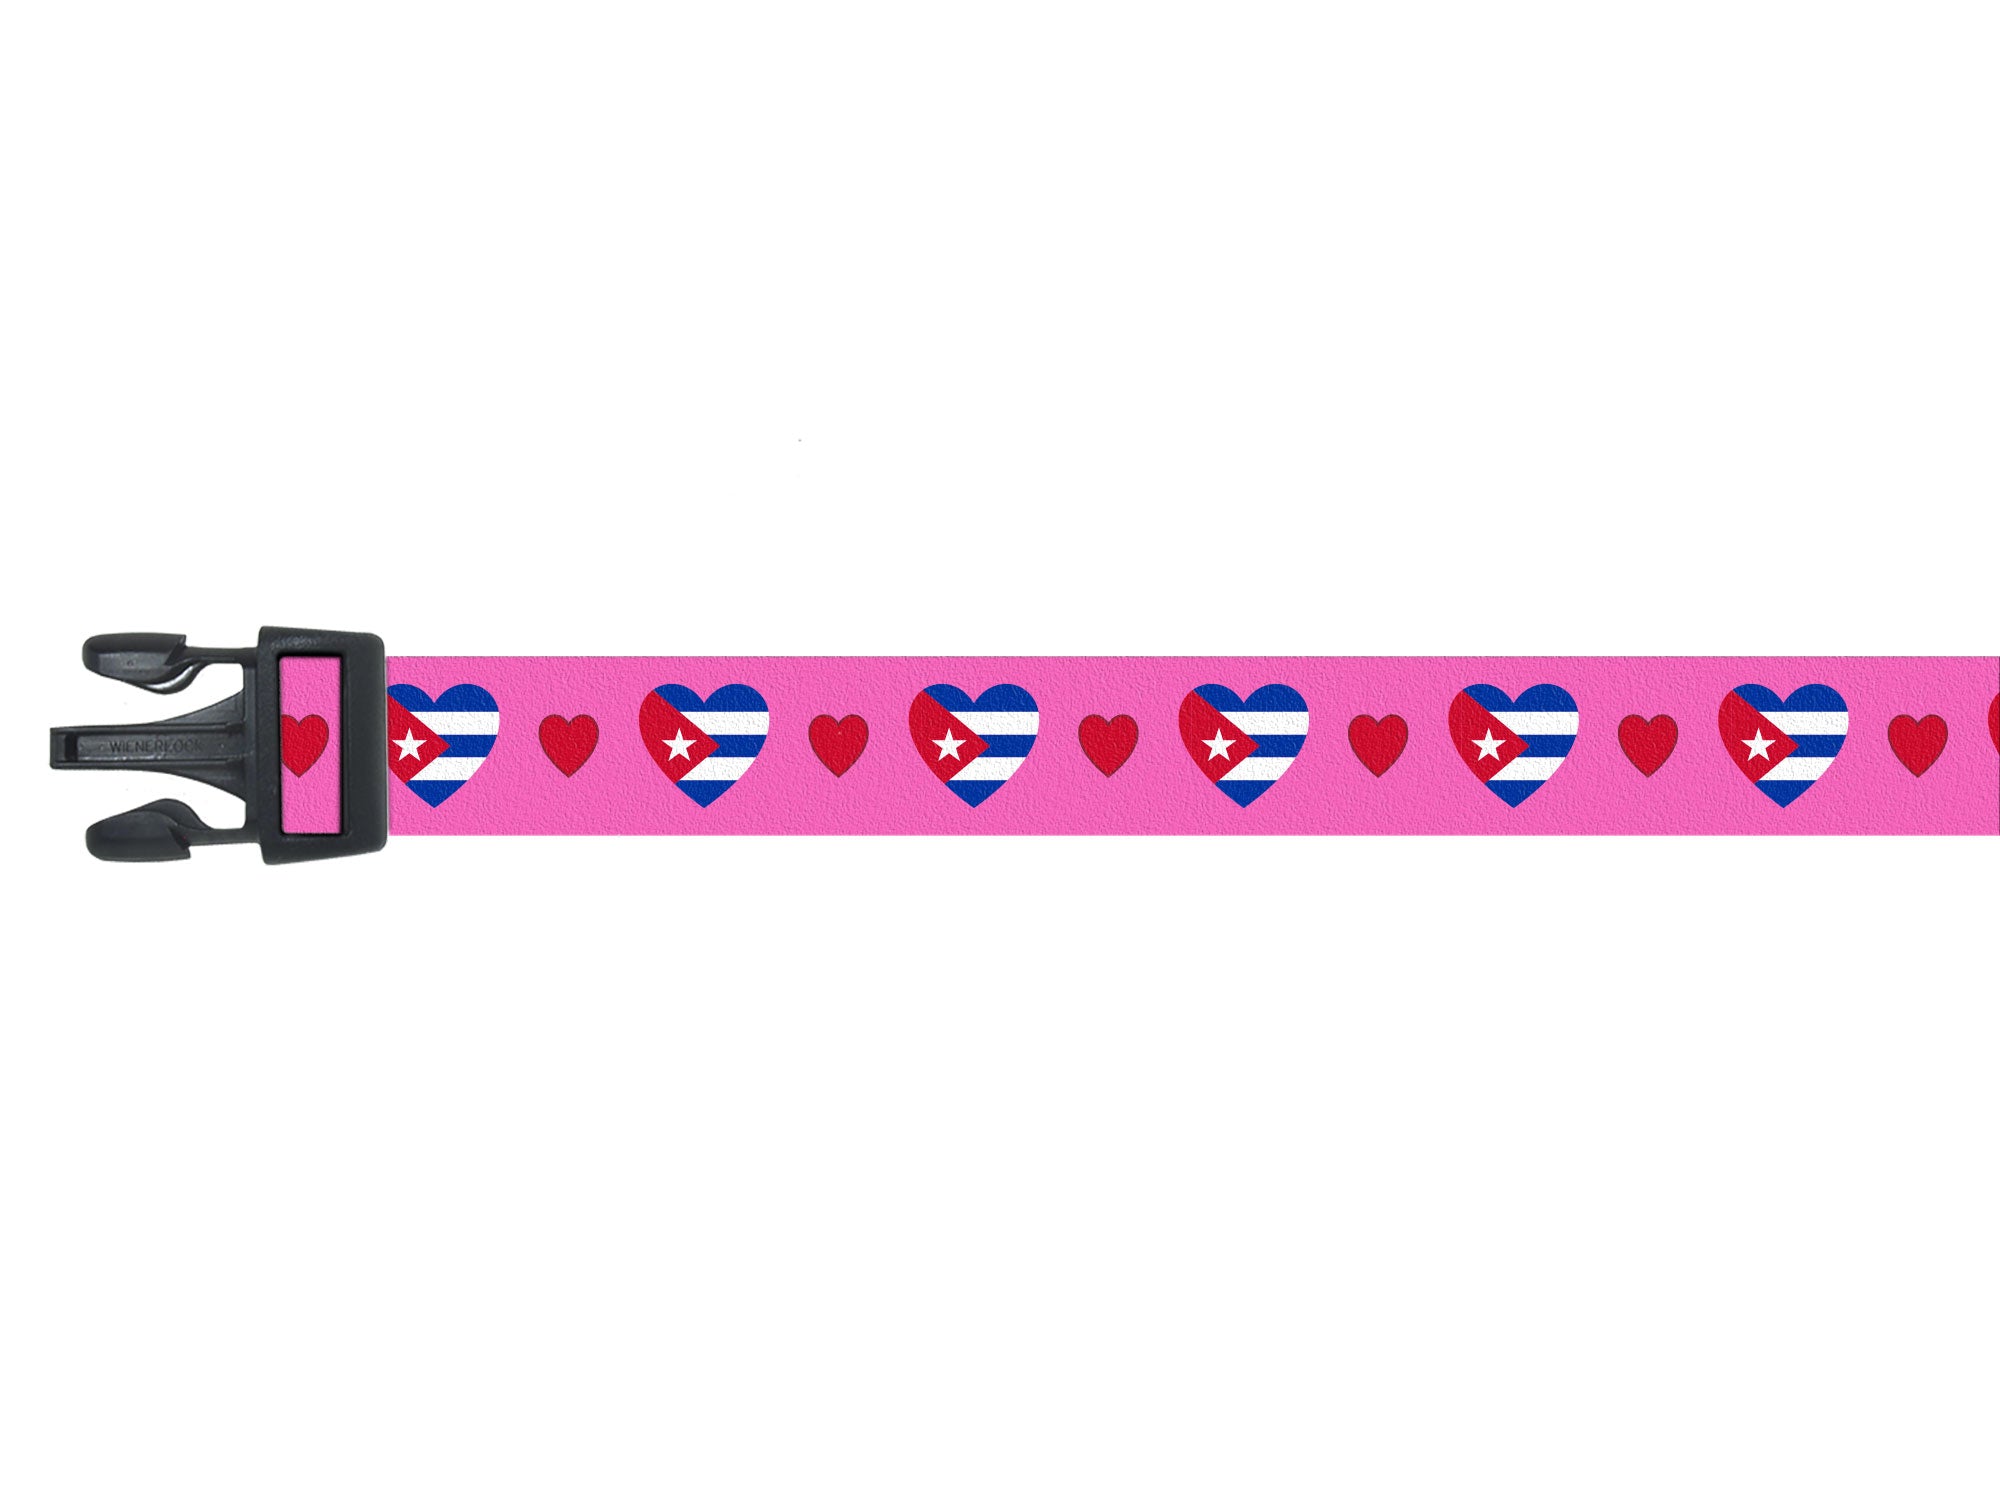 Dog Collar with Cuba Hearts Pattern in pink